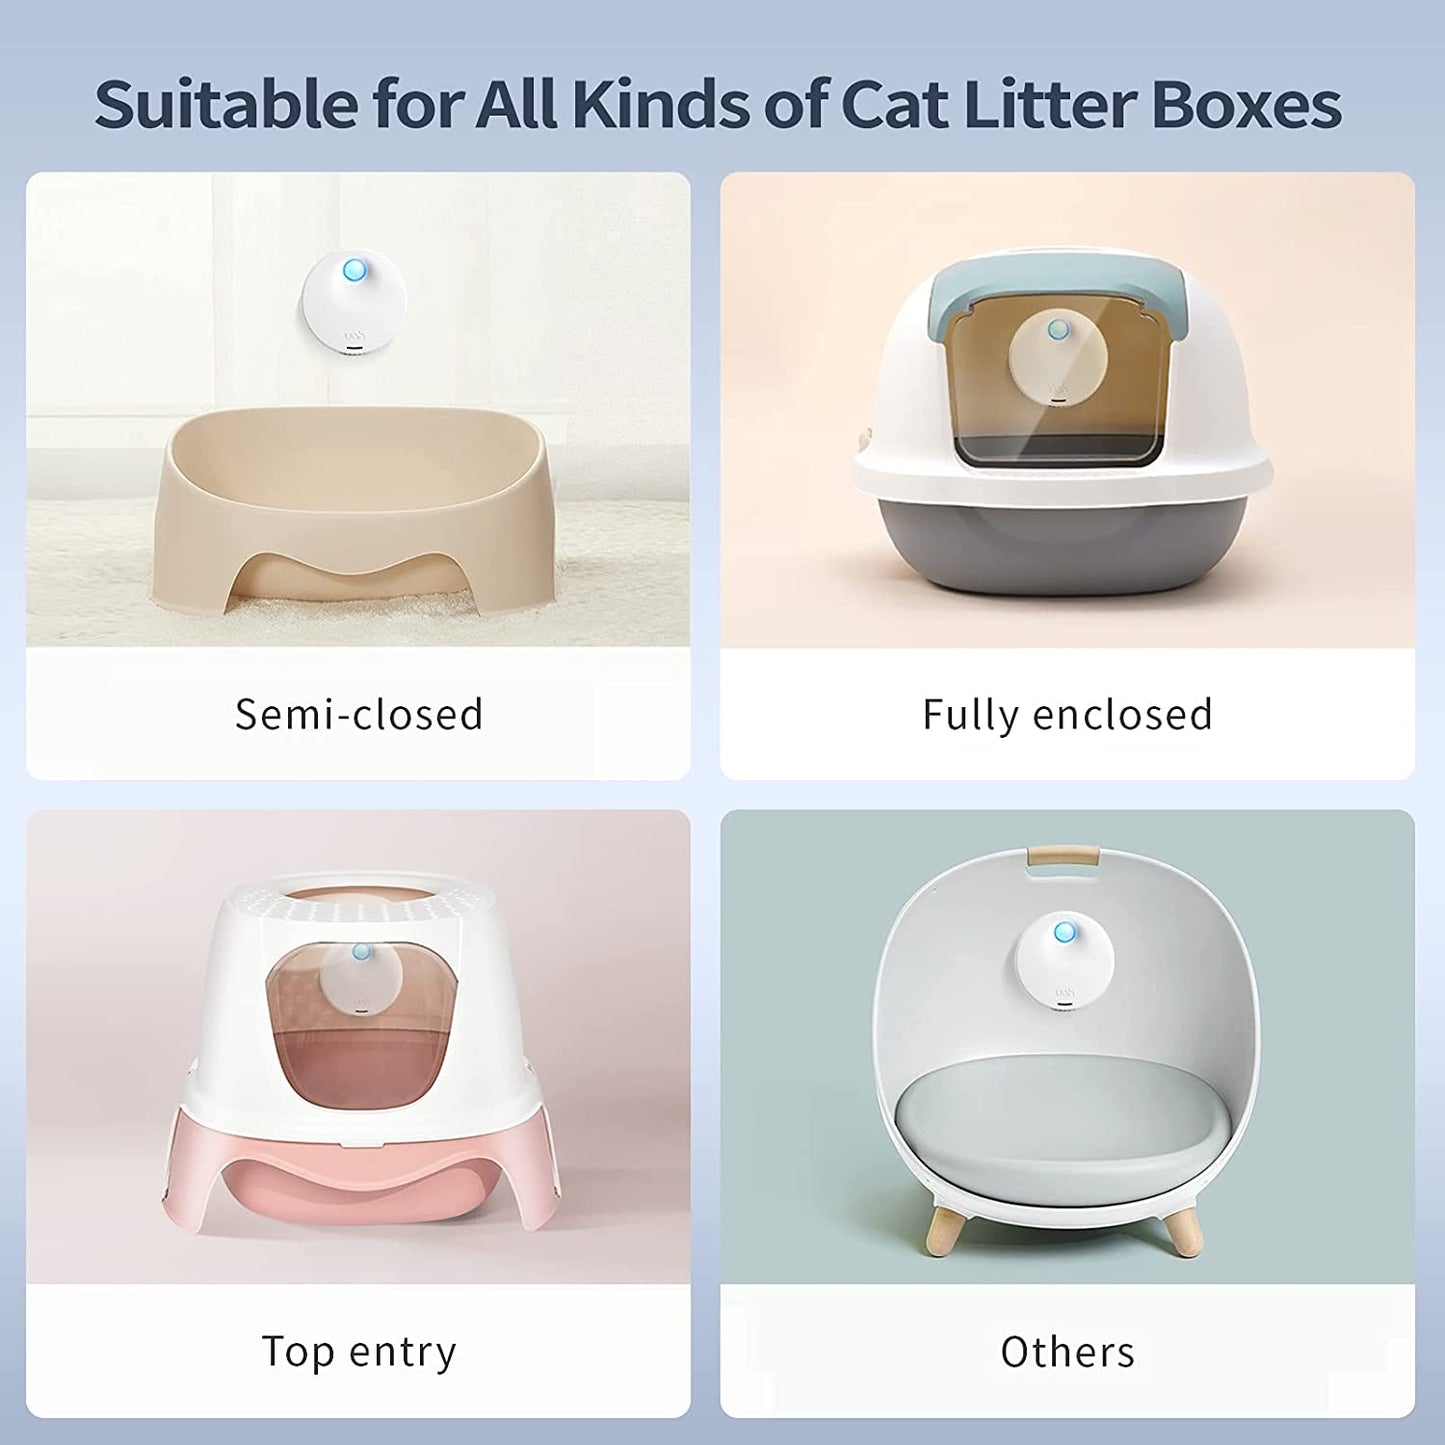 Uahpet, Cat Litter Deodorizer 99% Deodorization Litter Box Odor Eliminator 99.9% Dust-Free 9-Day Battery Life Genie for All Kinds of Cat Litter Box Bathroom Wardrobe Kitchen and Small Area